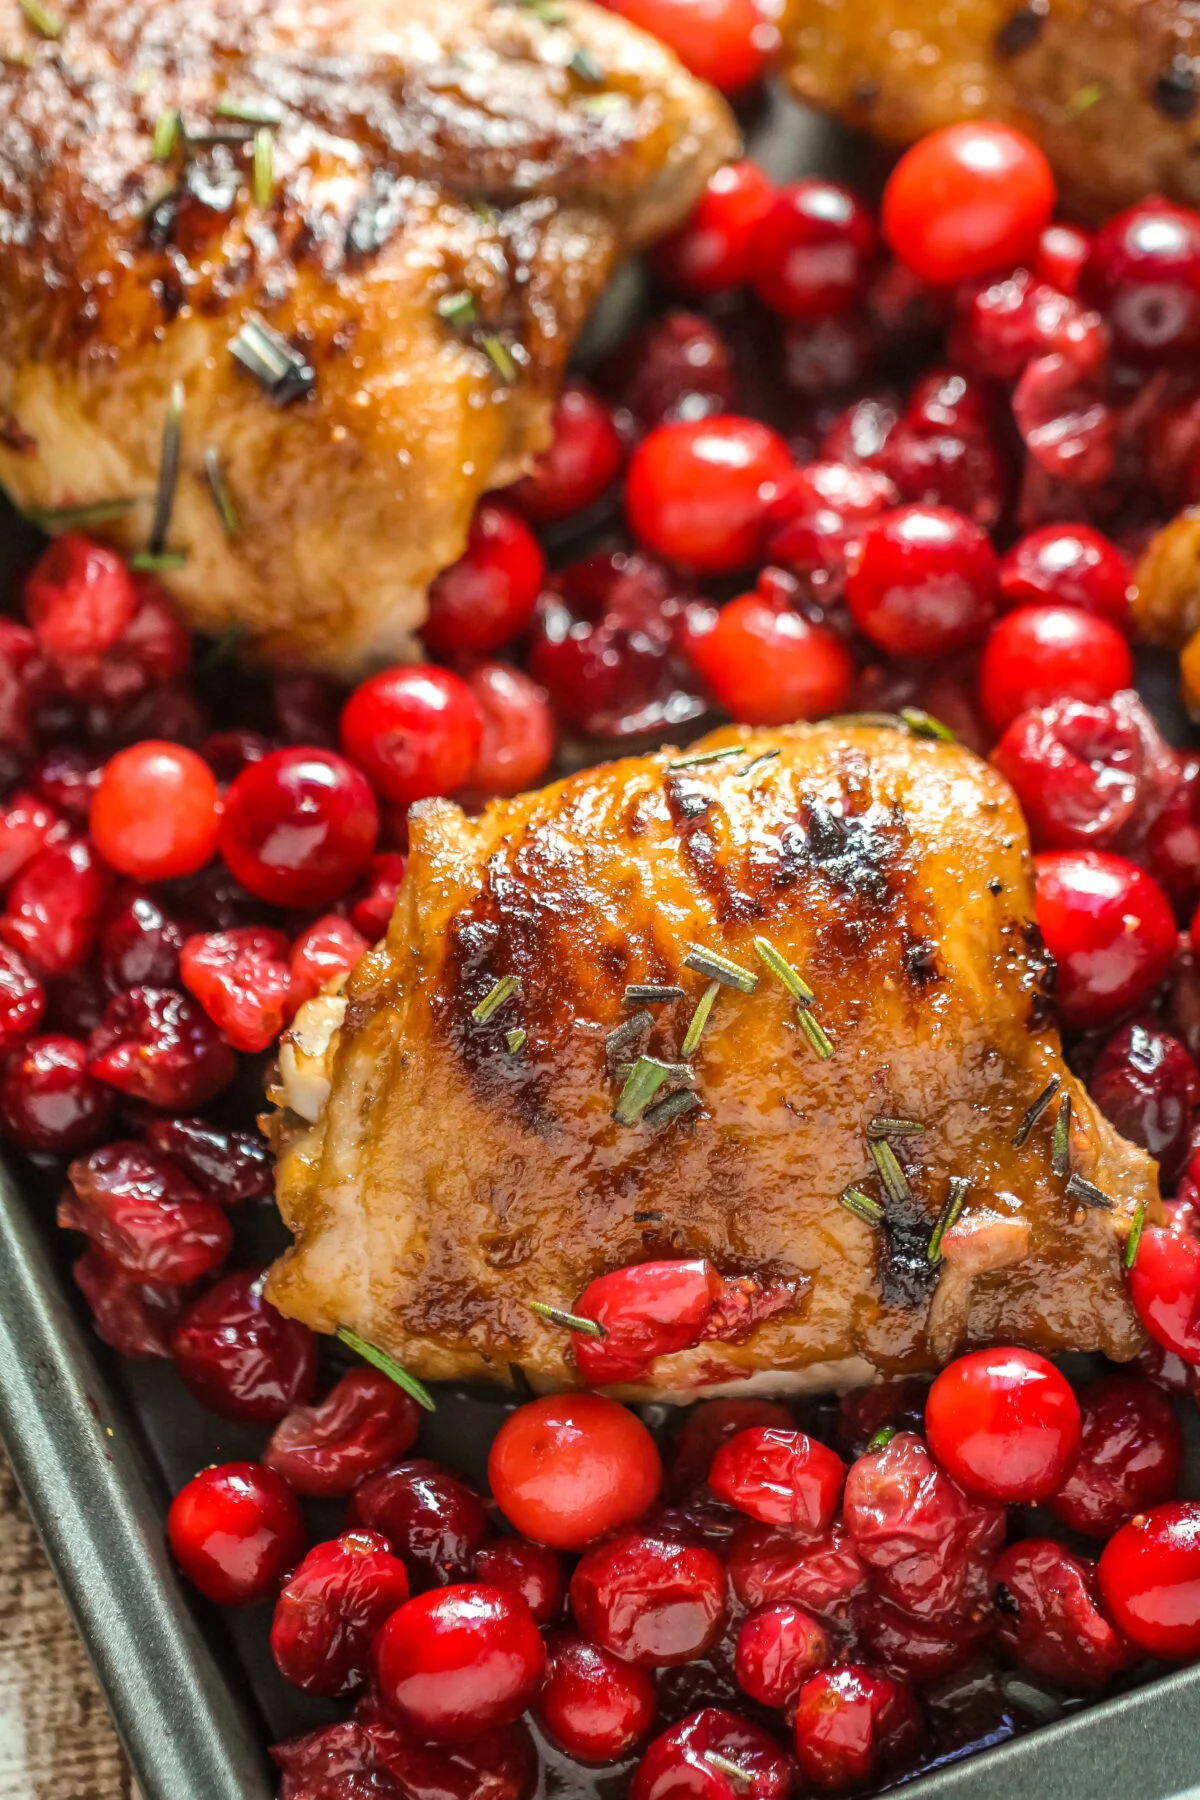 Forget about a boring night of the usual. Make your dinner more festive with this easy recipe for sheet pan cranberry roasted chicken!